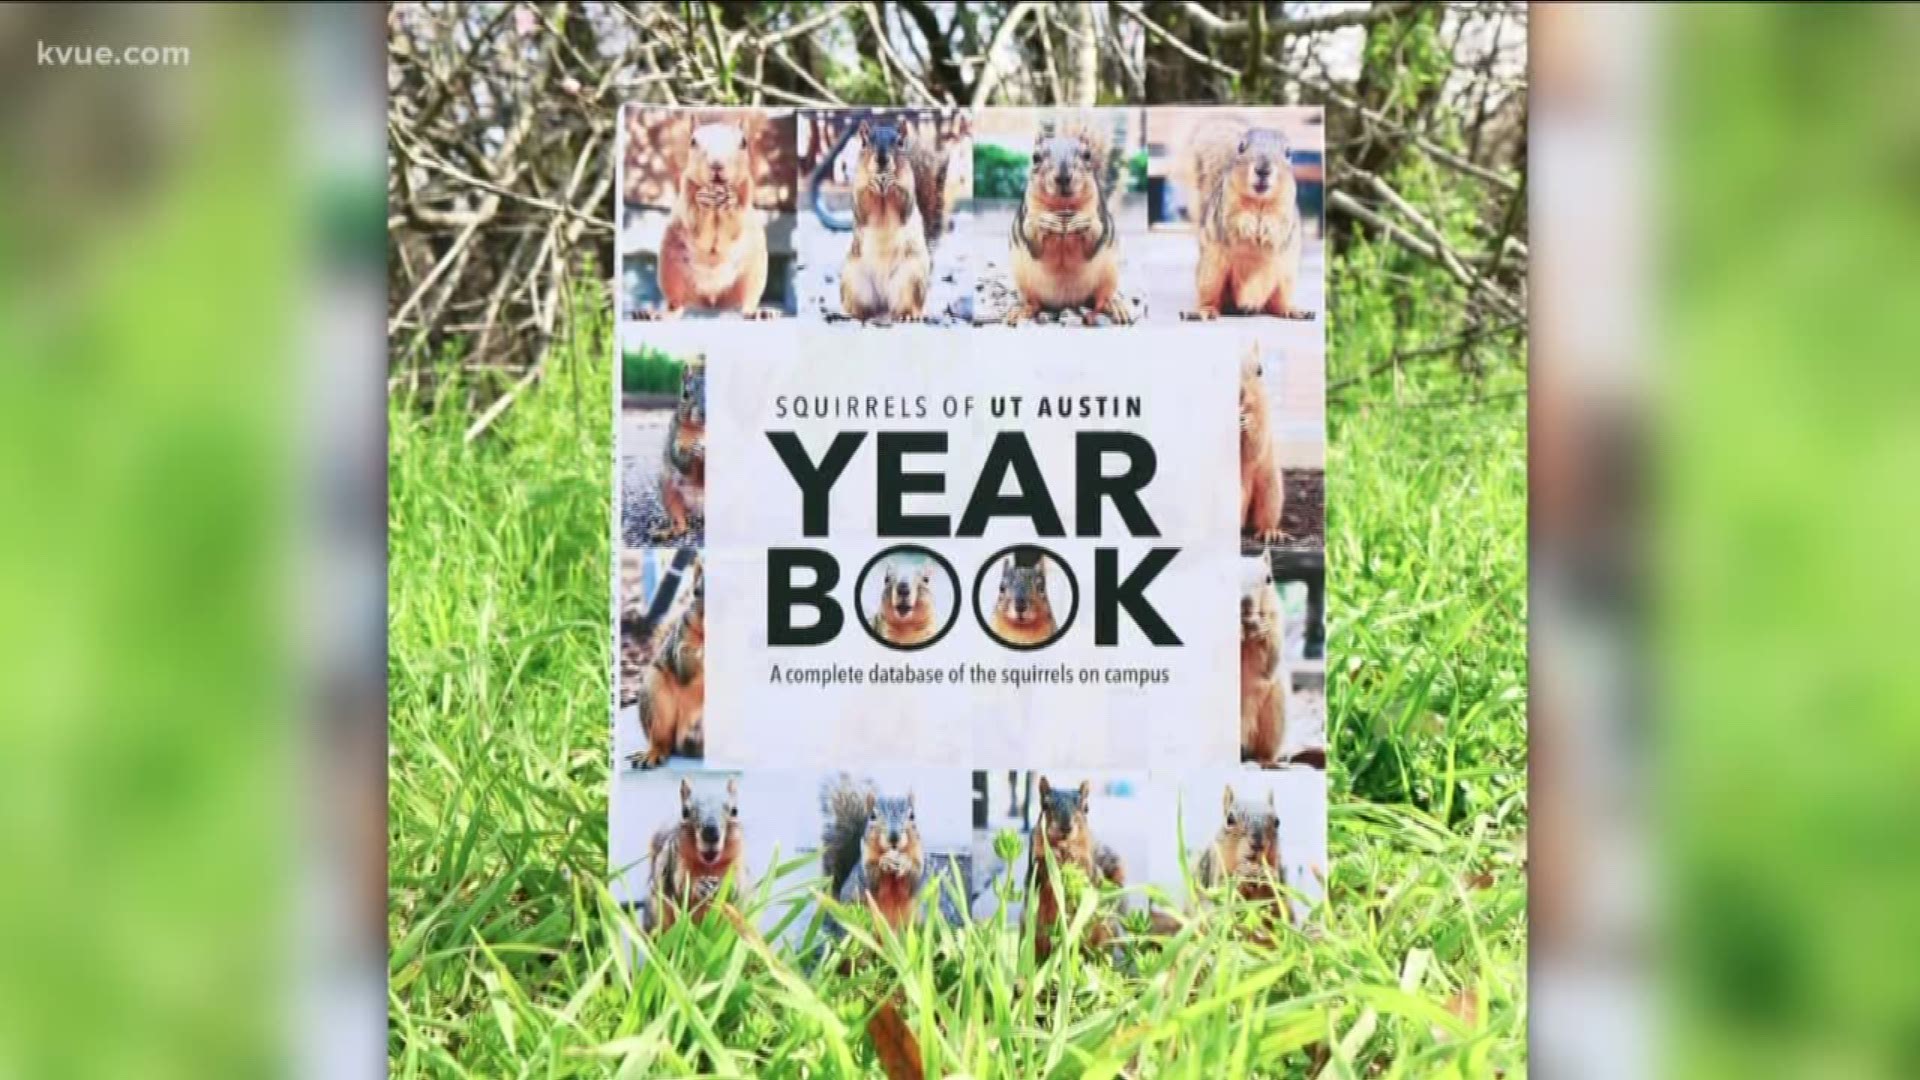 Students at the University of Texas can go nutty for the squirrels on campus with a new yearbook featuring the furry animals.